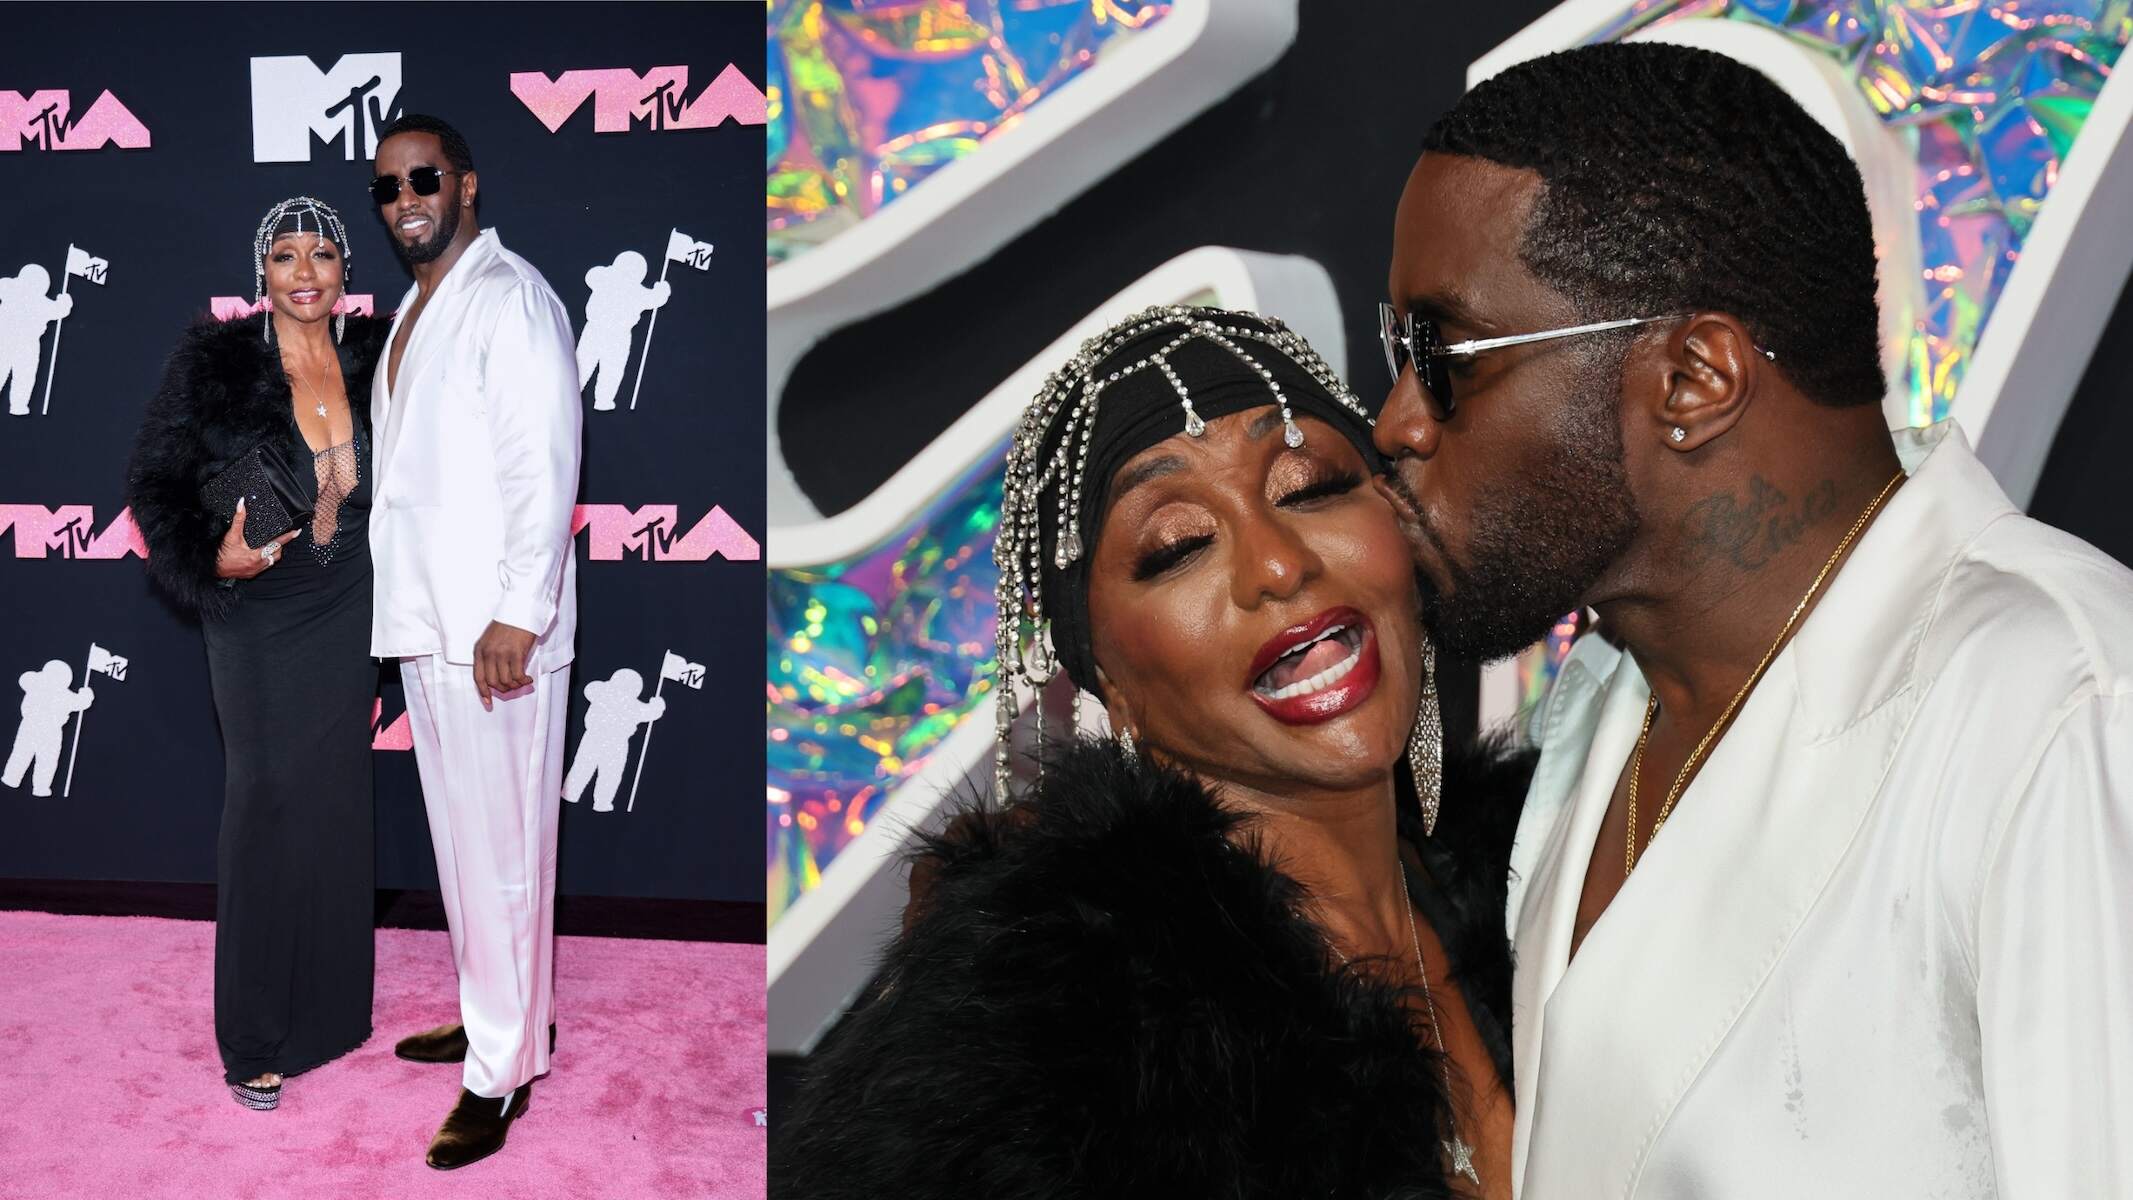 Diddy and his mom Janice Combs smile together on the red carpet at the 2023 MTV Video Music Awards